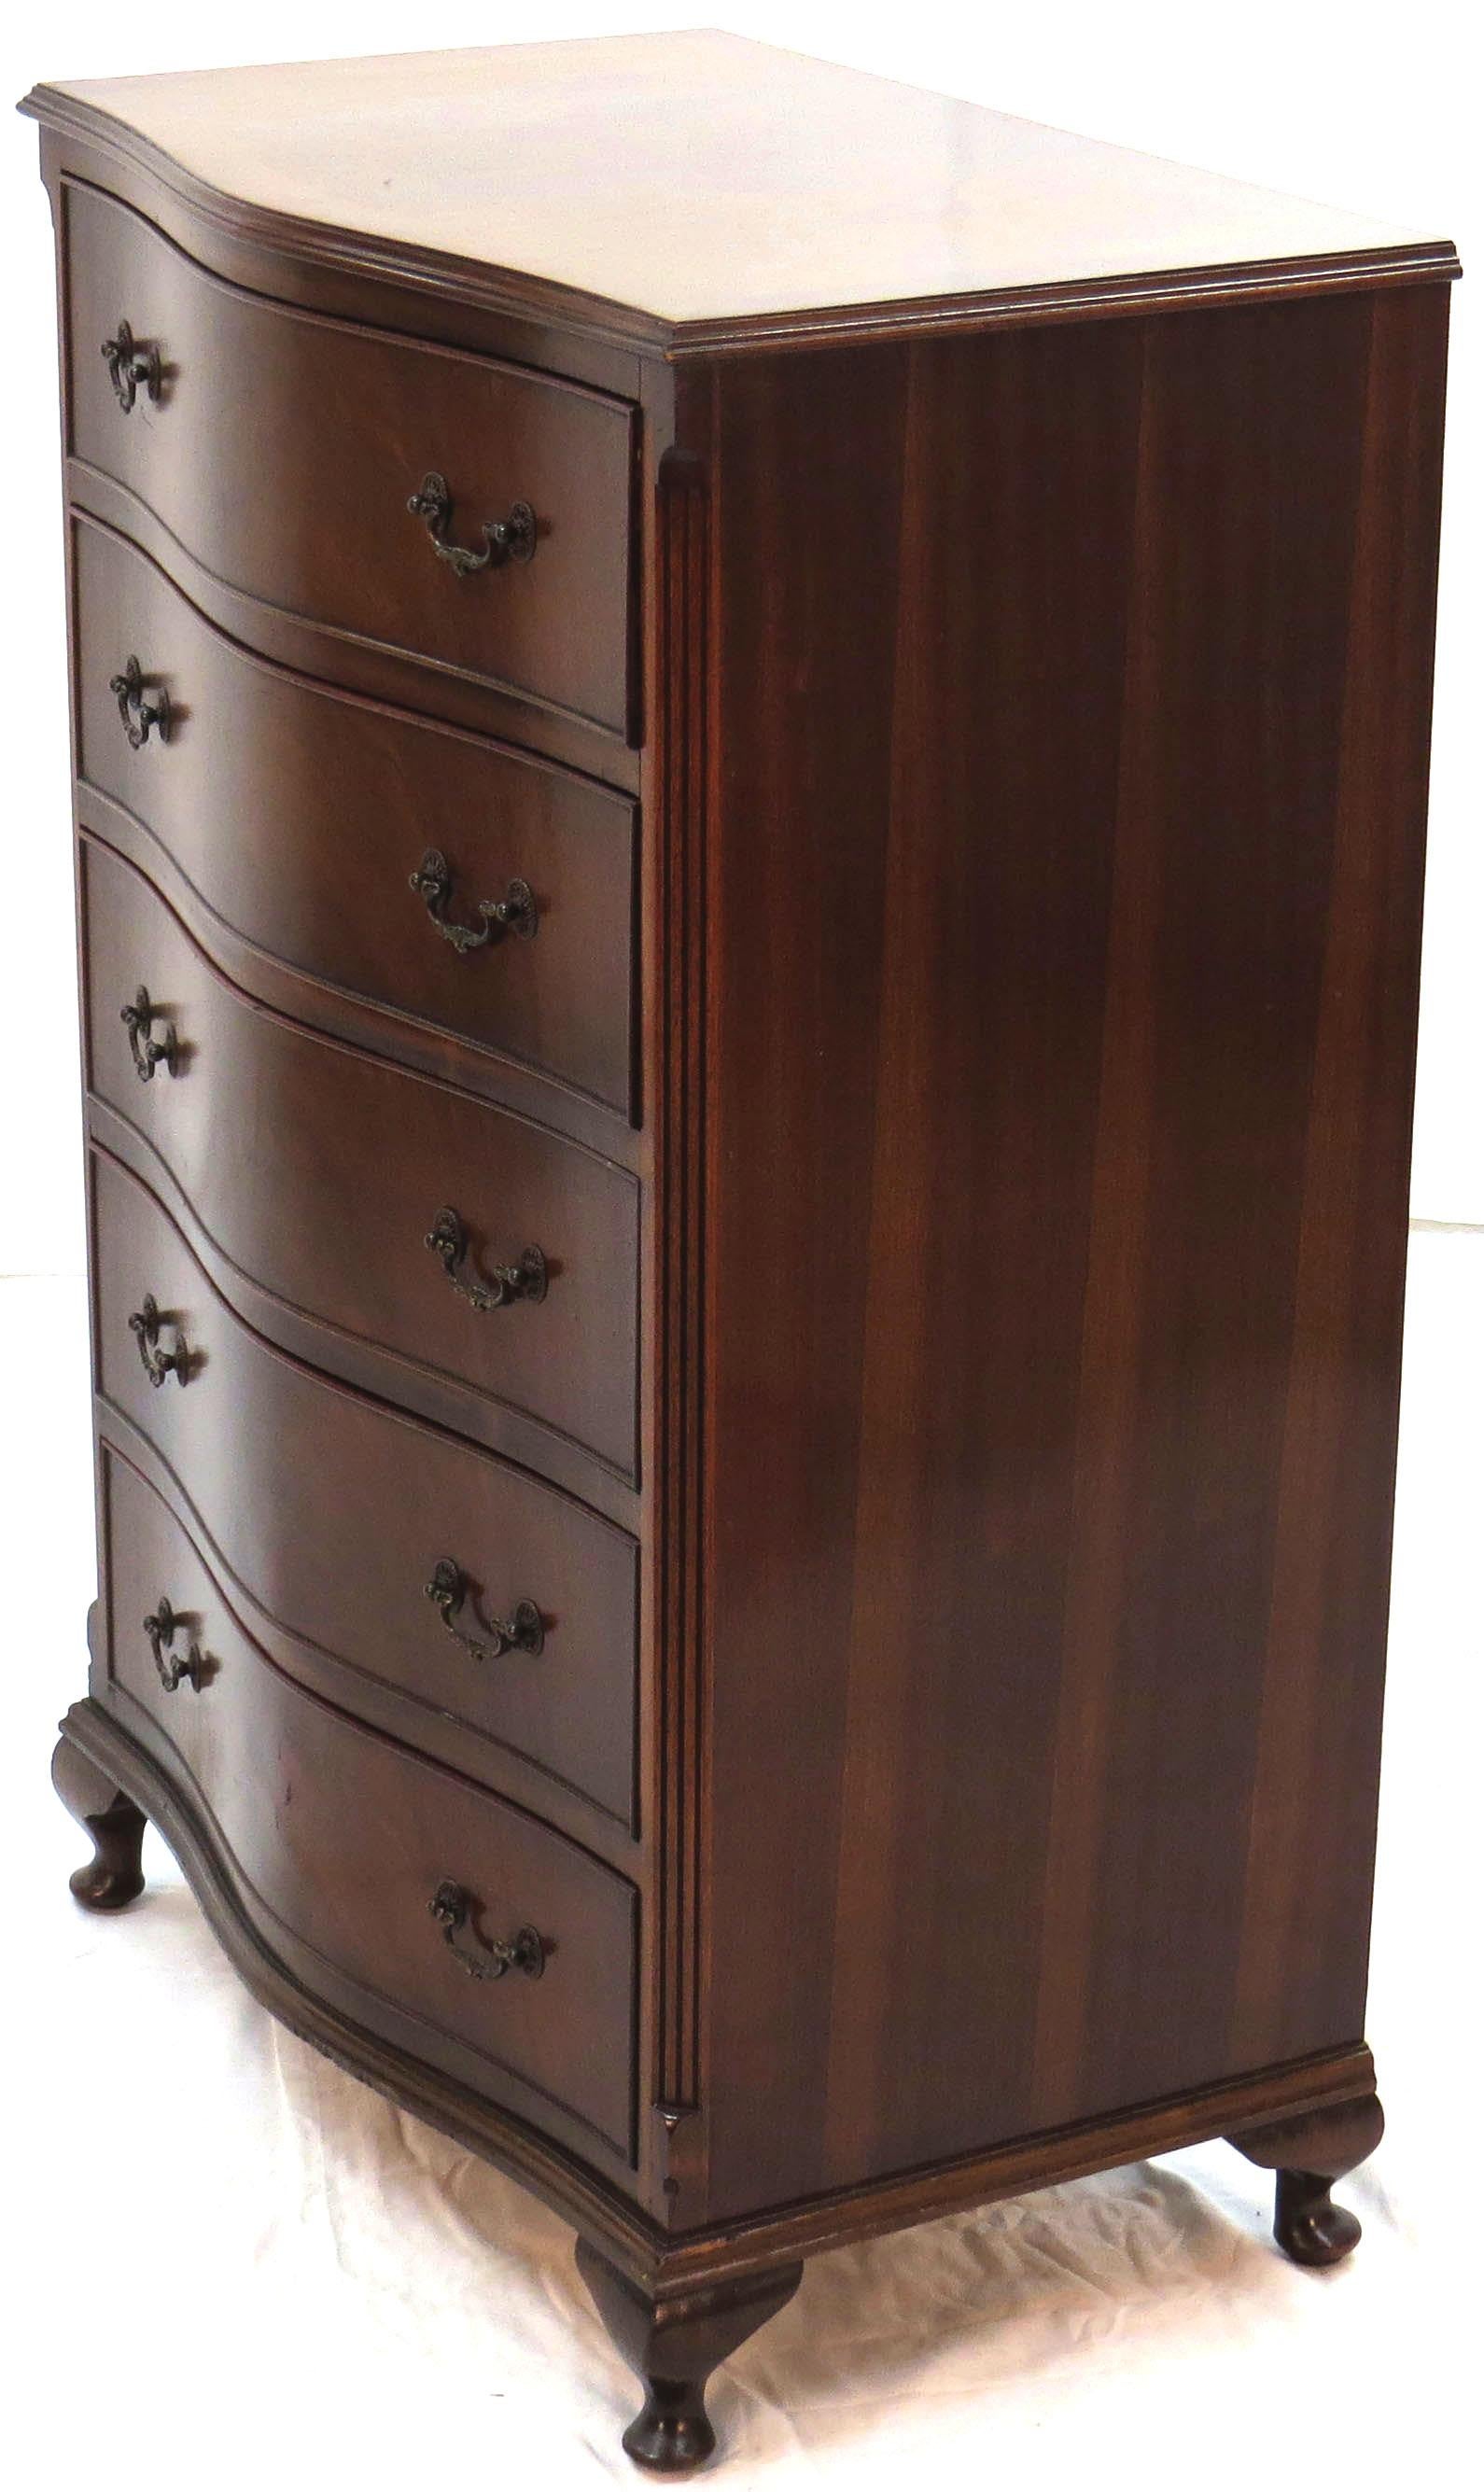 Mid-20th Century Walnut Bow Front Queen Anne Style Lingerie Chest of Drawers Dresser